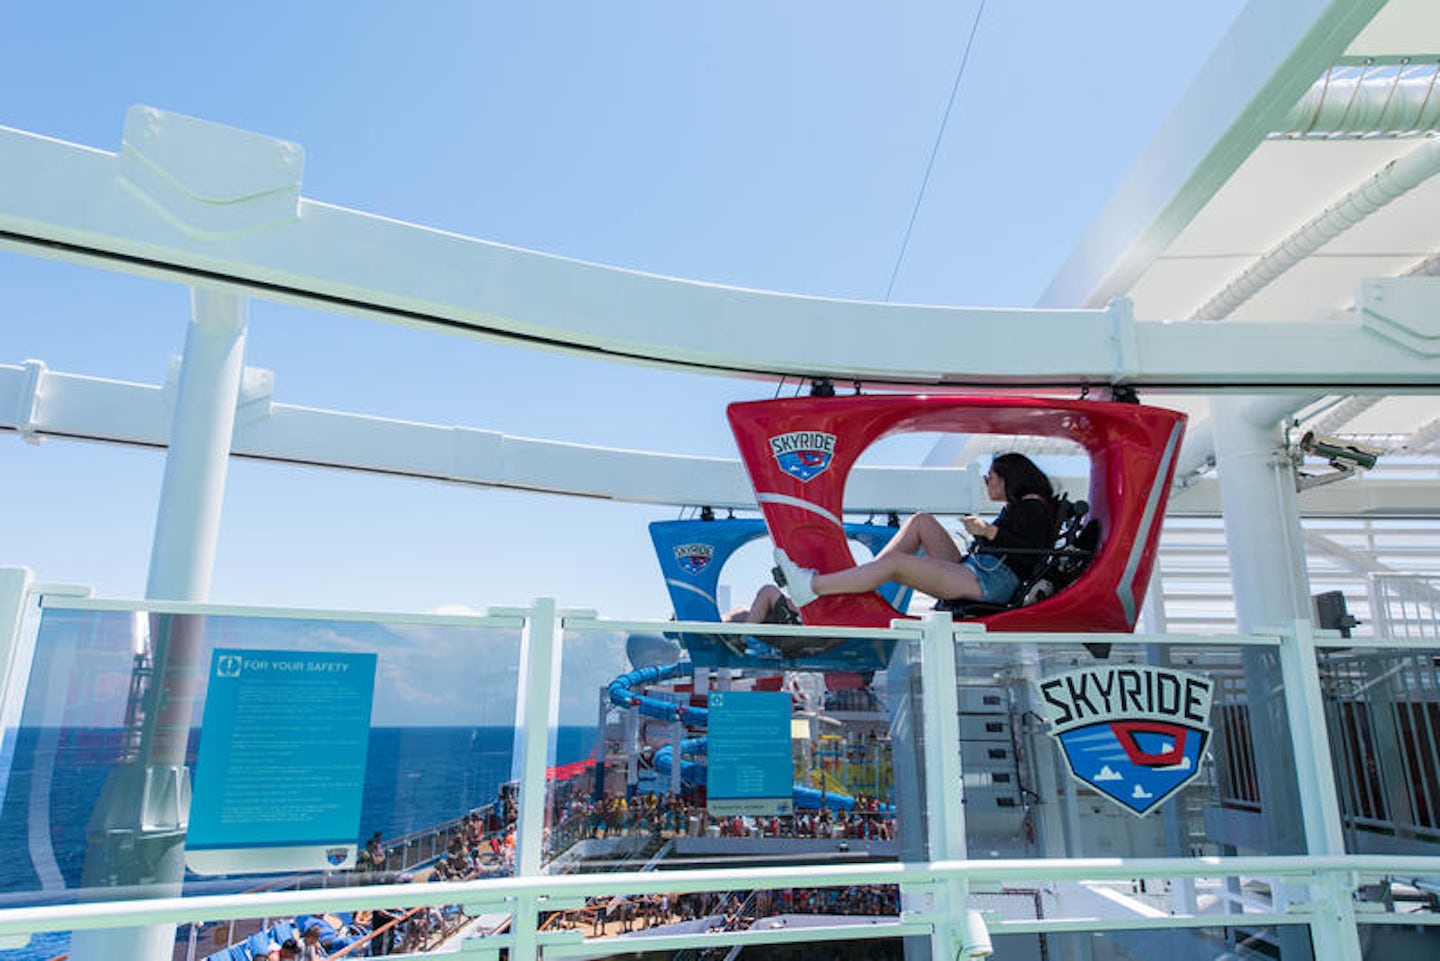 which carnival cruise has the skyride